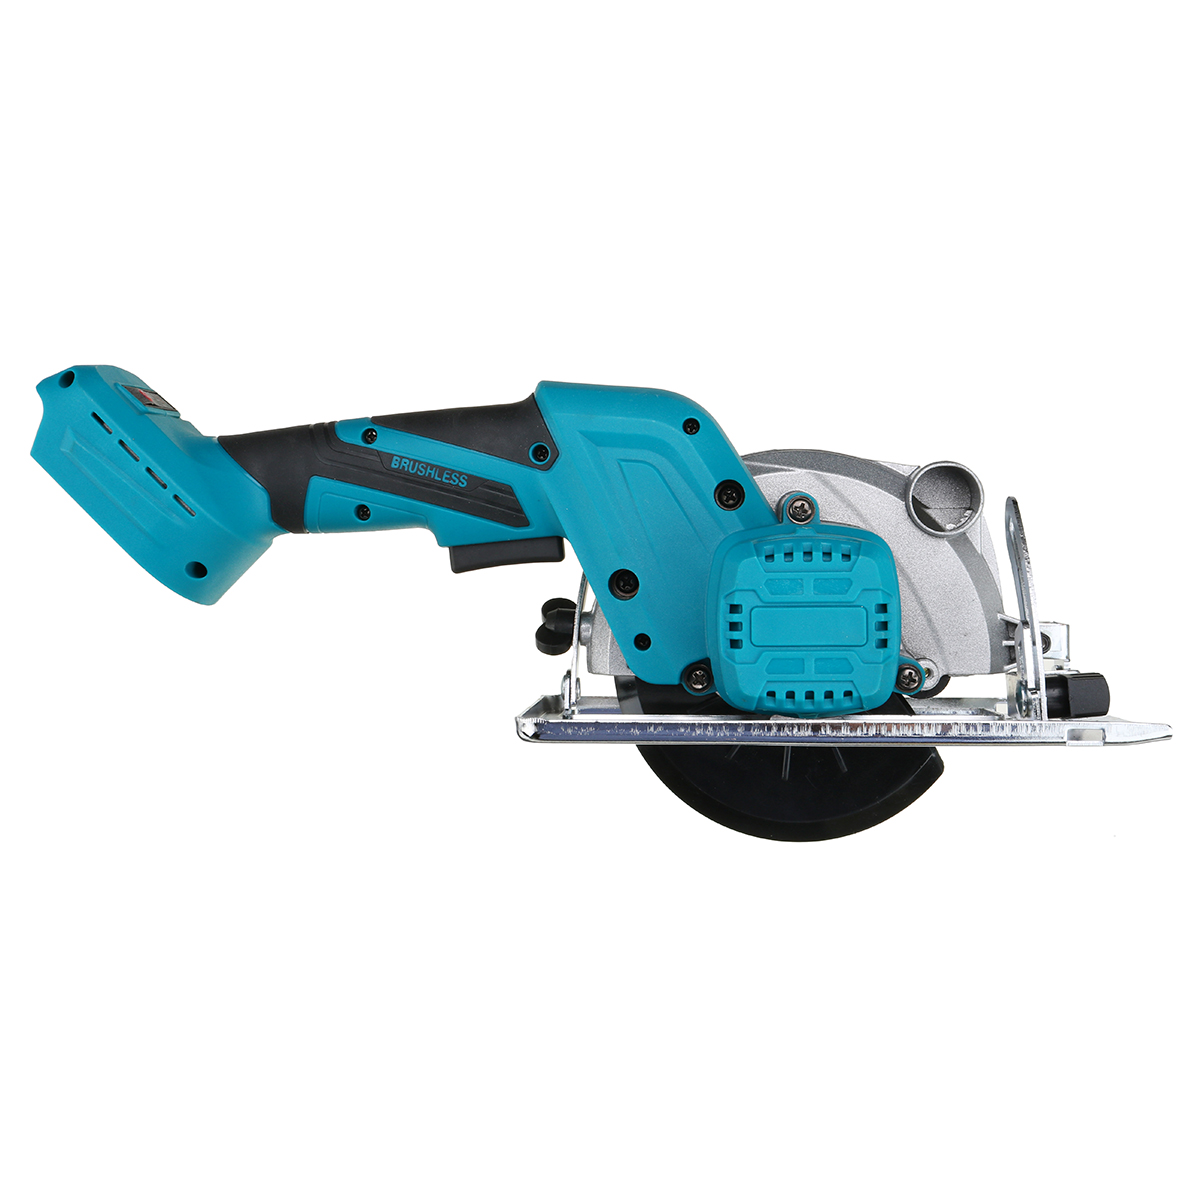 5-Inch-Rechargeable-Electric-Circular-Saw-Portable-Cutting-Sawing-Machine-W-1pc-Battery-1843019-5